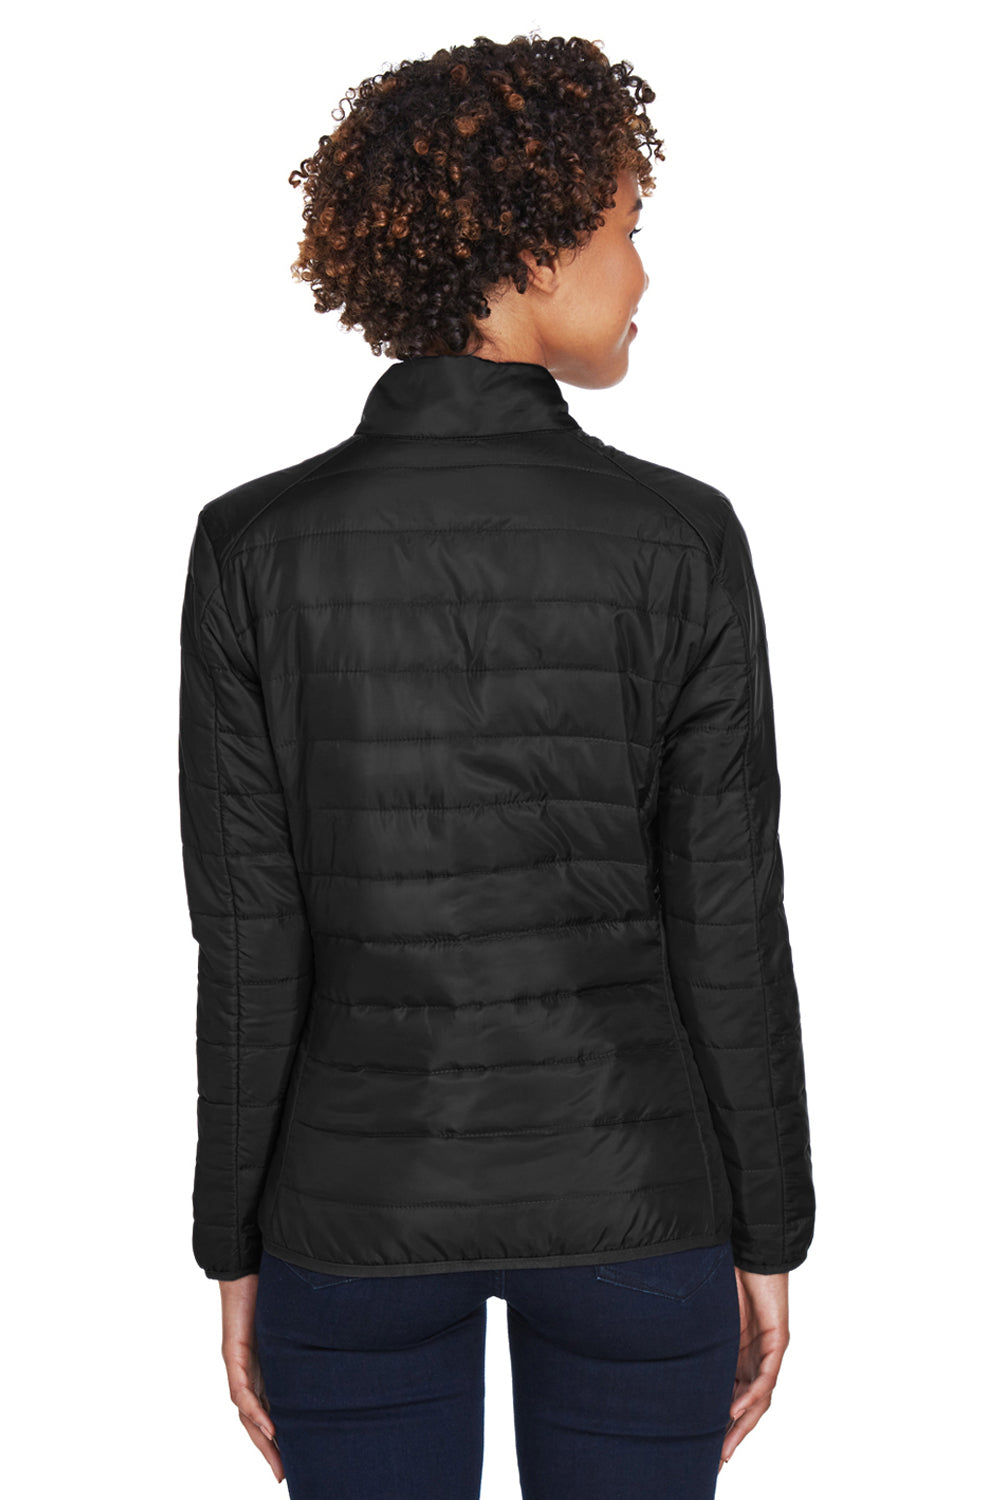 Core 365 CE700W Womens Prevail Packable Puffer Water Resistant Full Zip Jacket Black Back